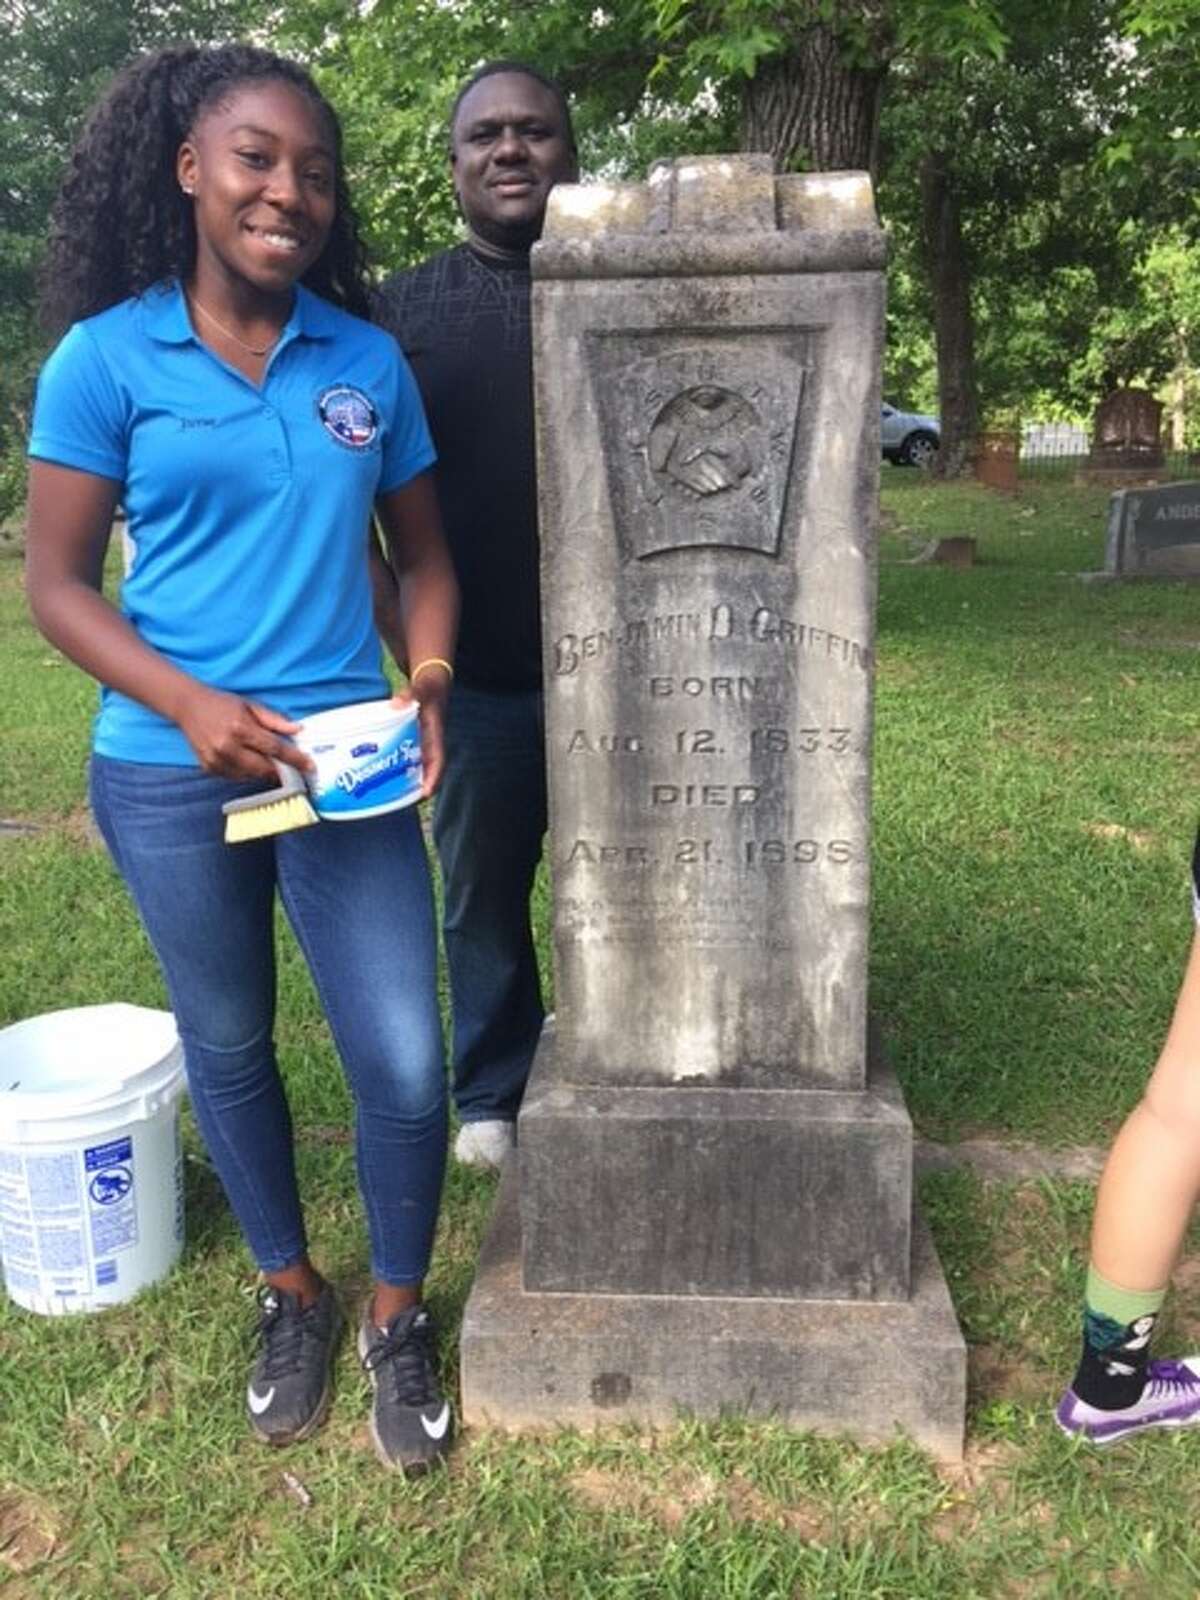 Youth Advisory Board member Juvae Williams and her dad, Dwight Williams, cleaned the tombstone of Benjamin D. Griffin. Benjamin D (BD) Griffin was a Montgomery County Clerk and leader in the late 1800s.